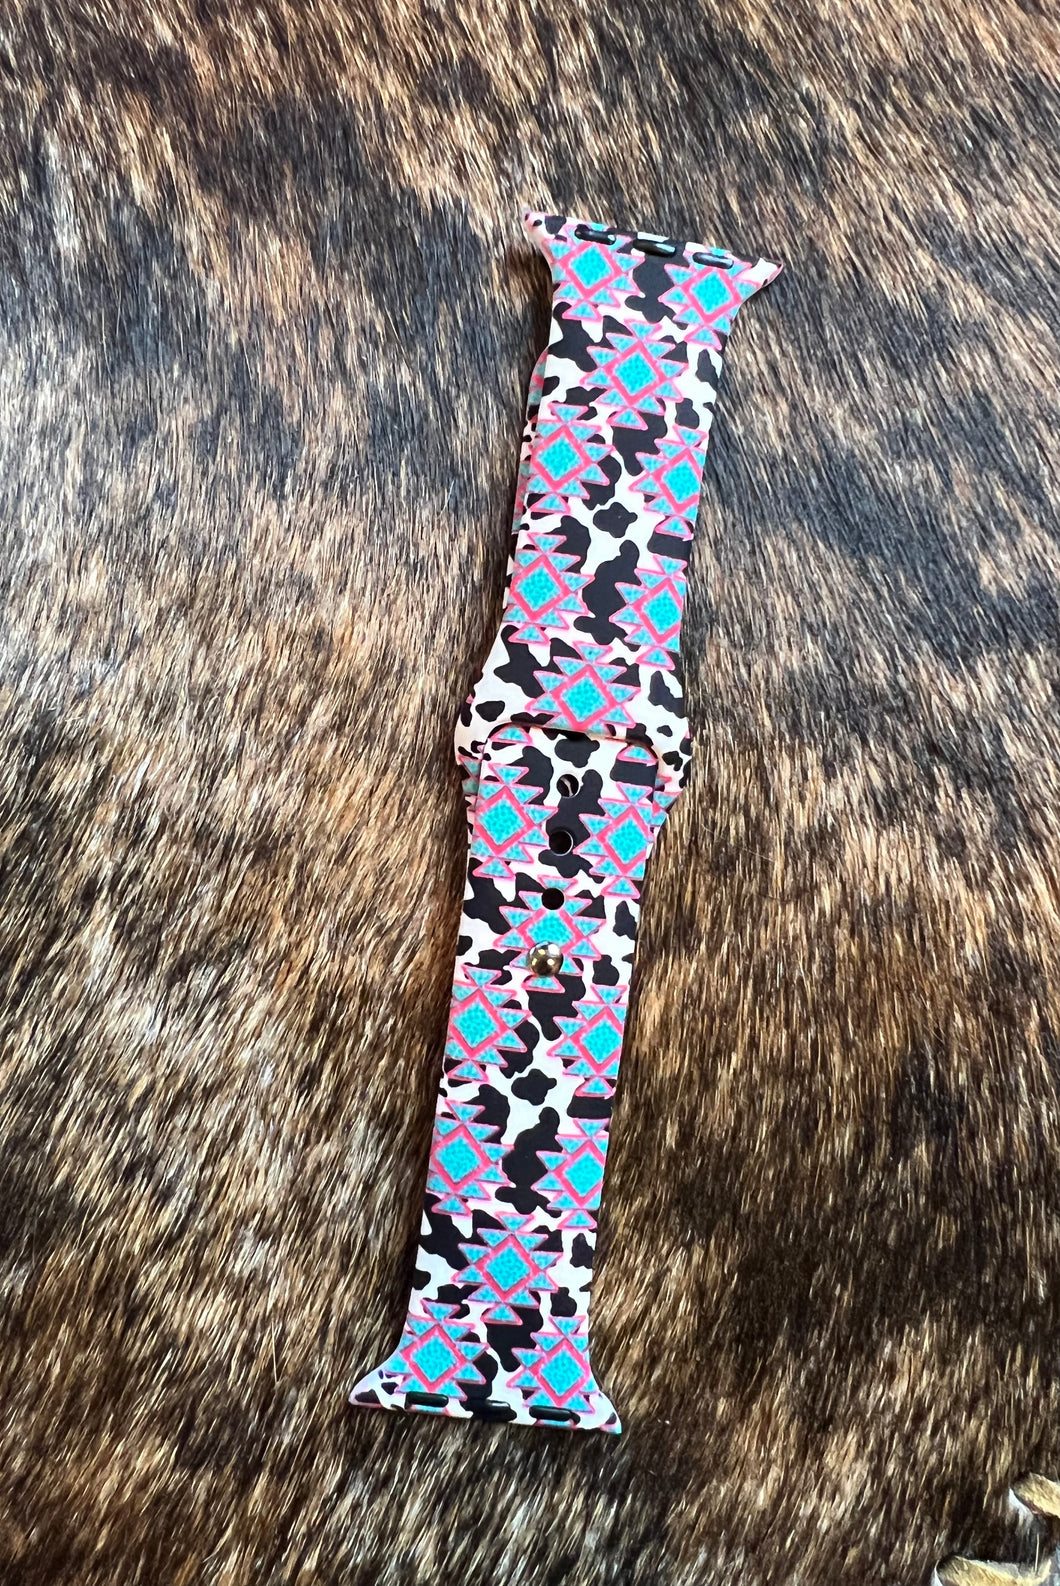 Cow Aztec Apple Watch band